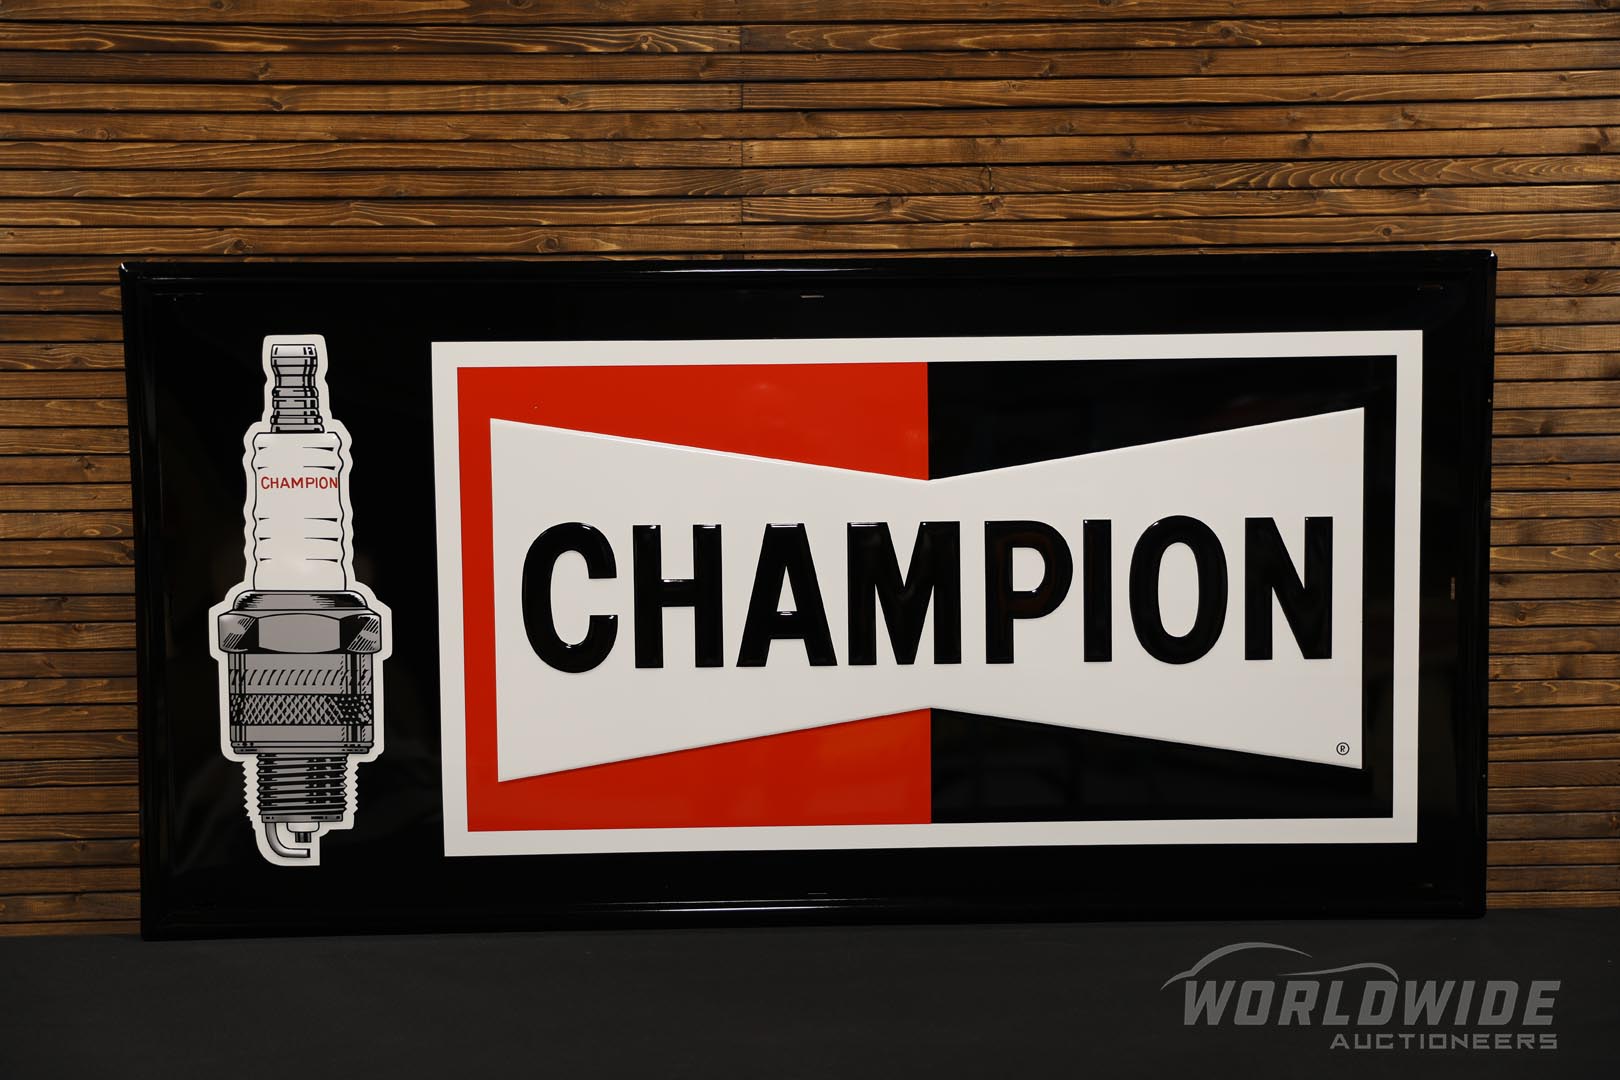  Champion Spark Plugs NOS Embos sed Tin Sign 